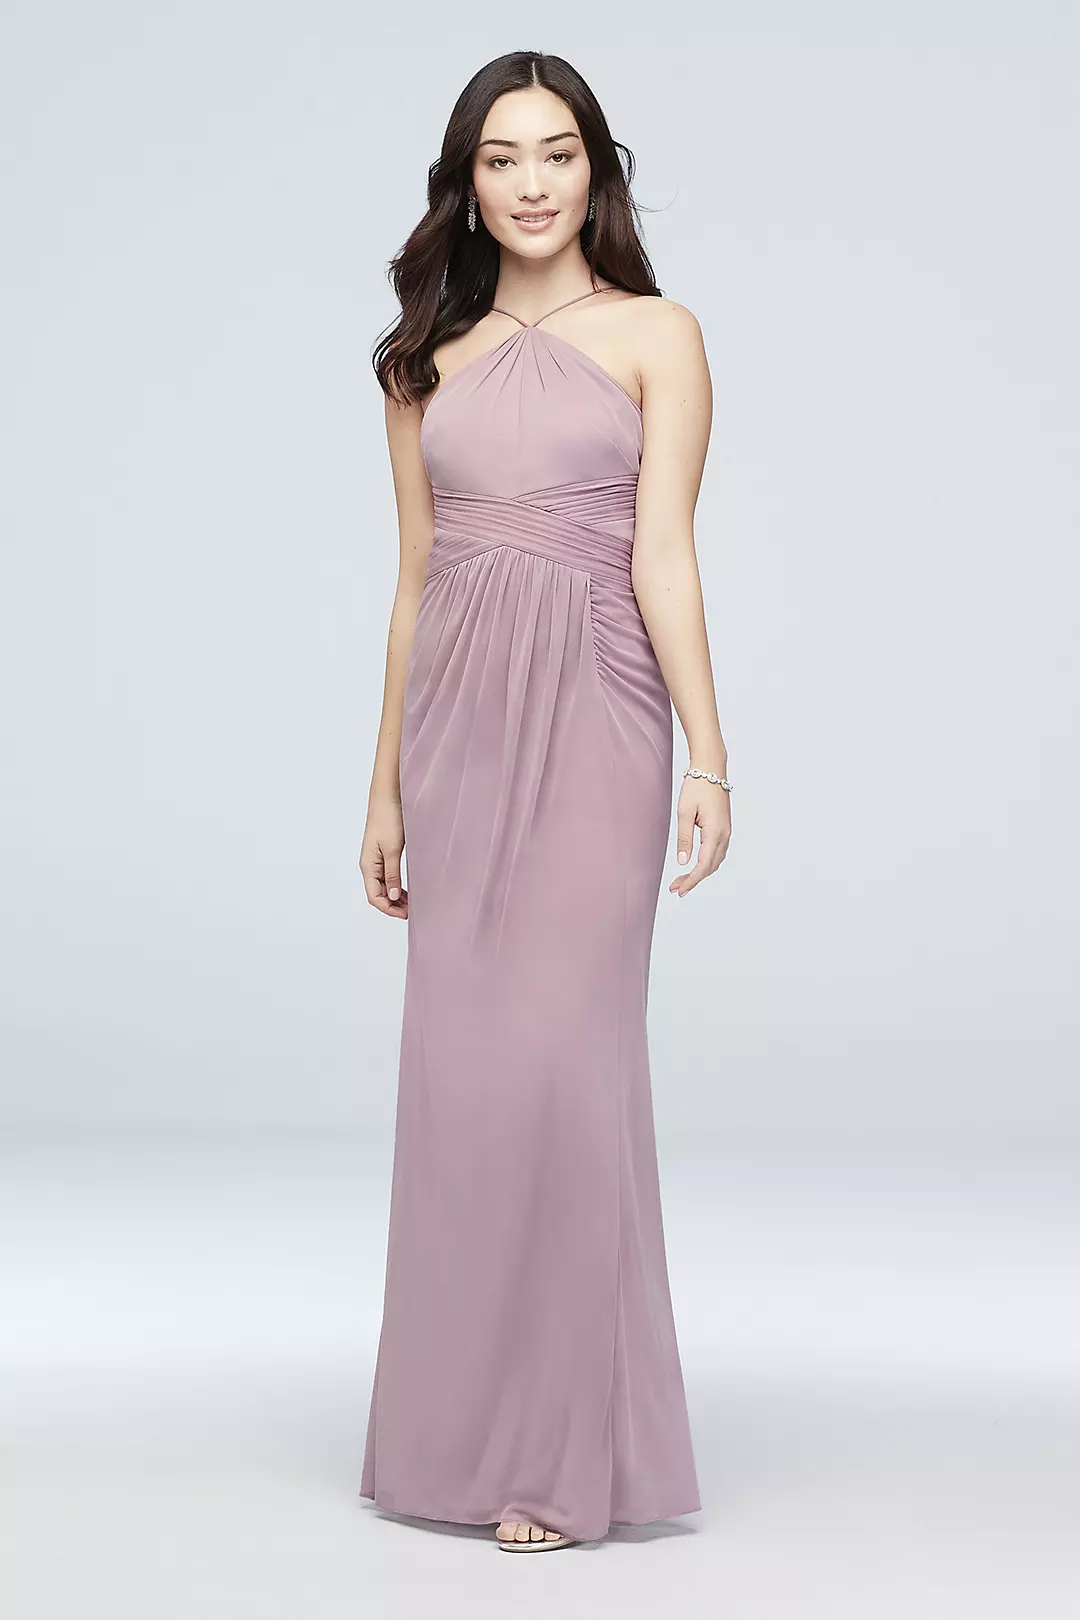 Y-Neck Mesh Bridesmaid Dress with Pleated Waist Image